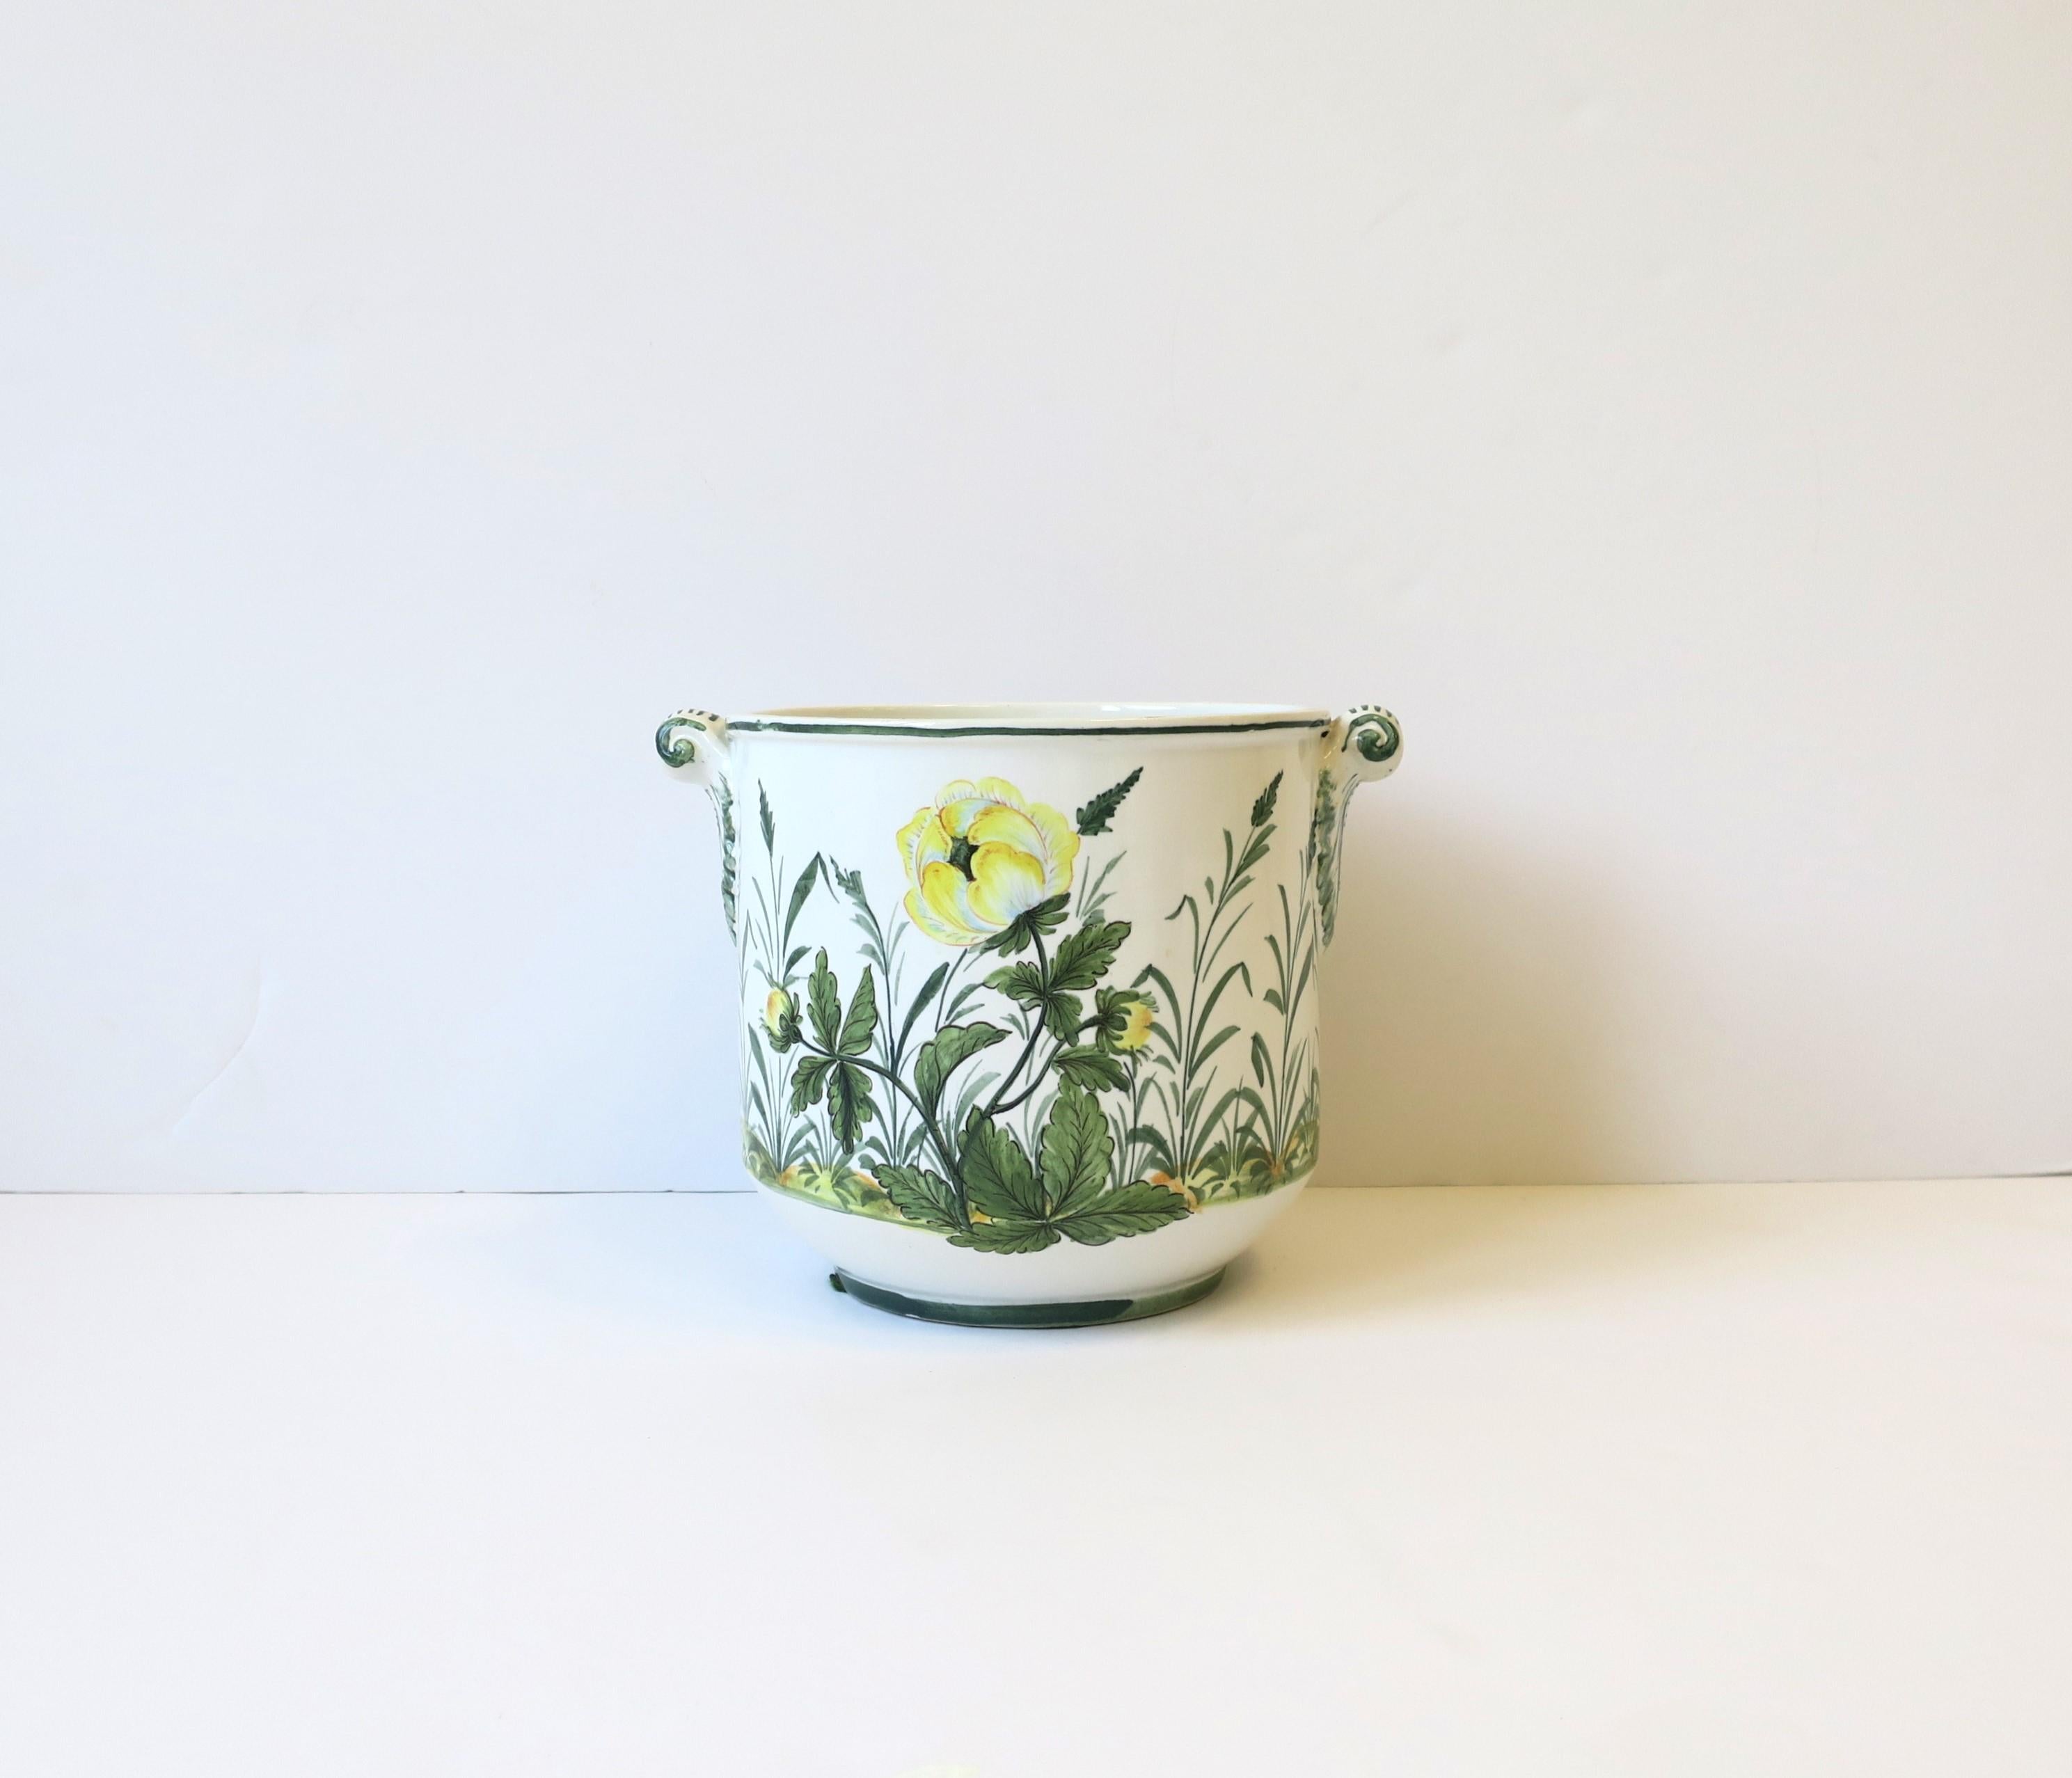 An Italian white ceramic green and yellow flower or plant pot holder cachepot jardiniere planter with yellow and green flowers, leaves and tall grass, circa late-20th century, Italy. Piece has a design on front and back with scroll handles on sides.